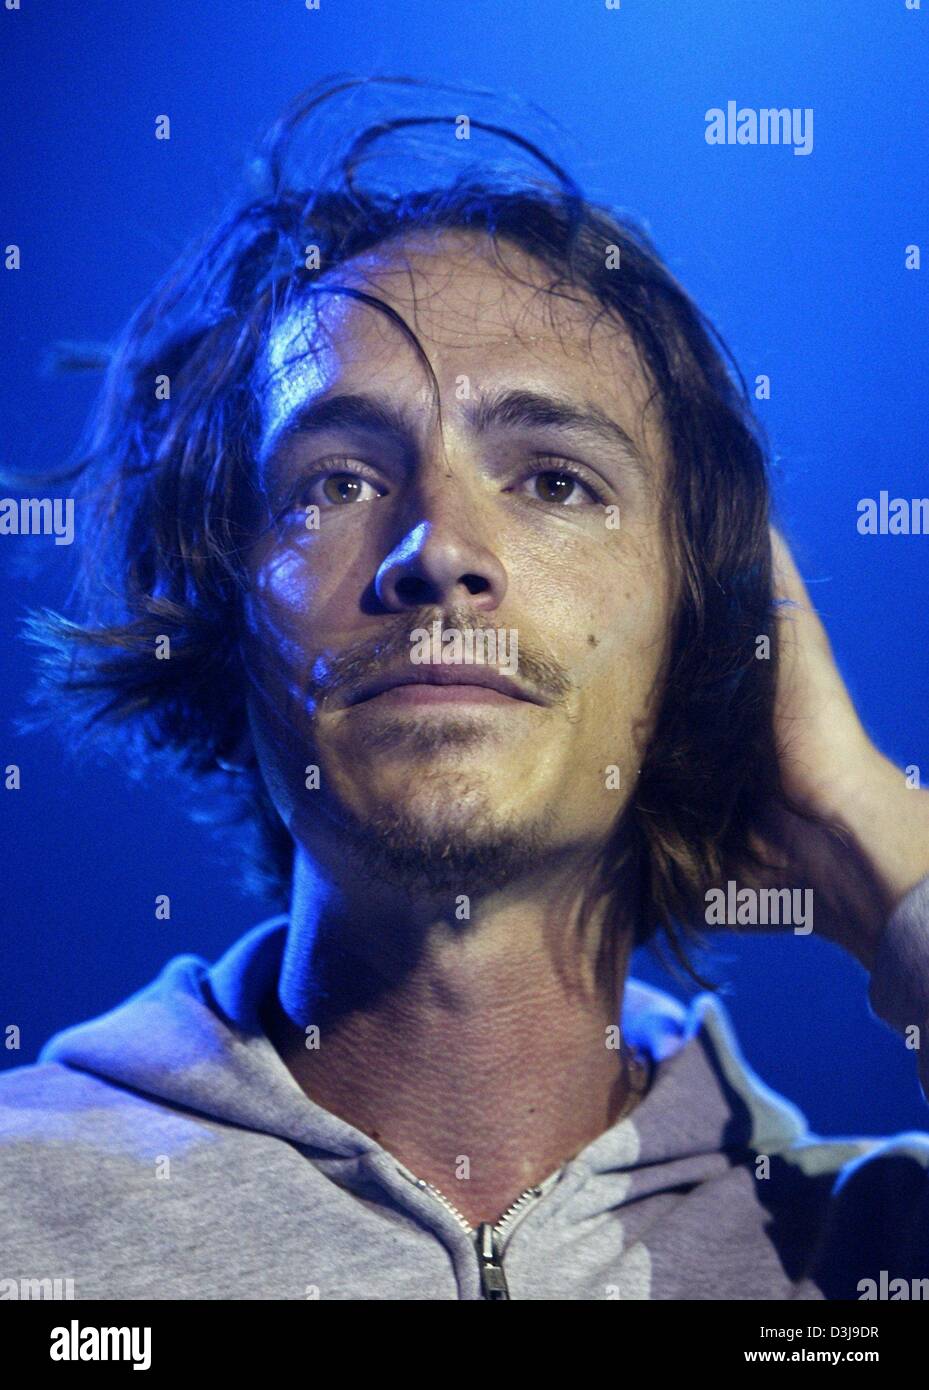 (dpa) - Brandon Boyd, lead singer of US rock band 'Incubus', performs on stage during the first concert of their German tour at the Jahrhunderthalle in Frankfurt, Germany, 12 April 2004. The band from California, which promotes their fifth album titled 'a crow left from the murder', first received recognition with a cover song of Madonna's hit single 'Papa don't preach'. Stock Photo